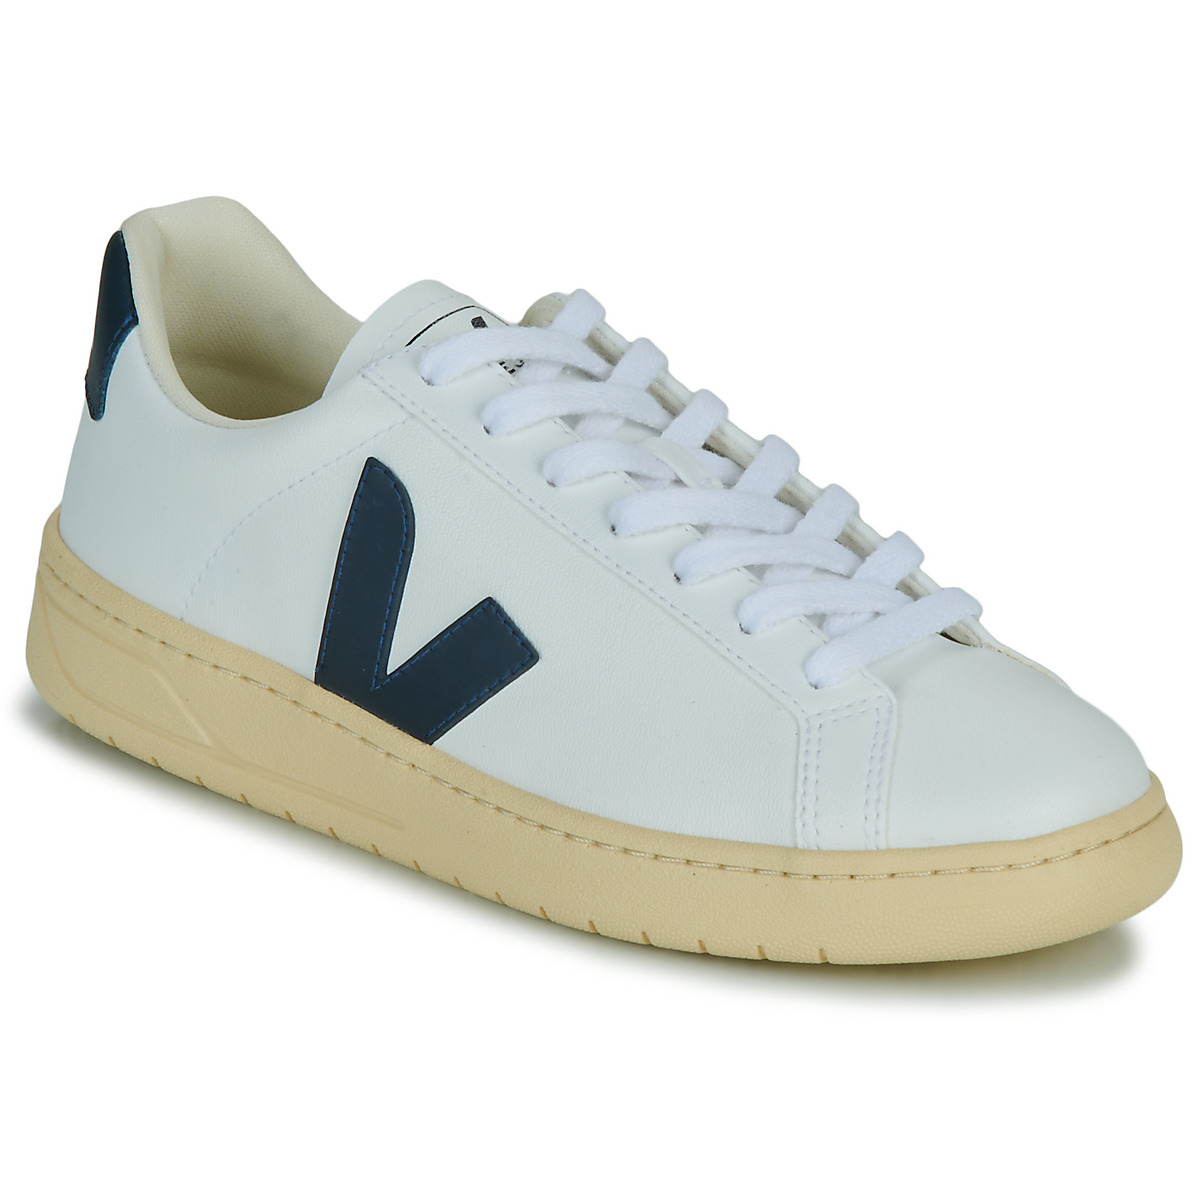 Shoes Low top trainers Veja URCA White / Blue